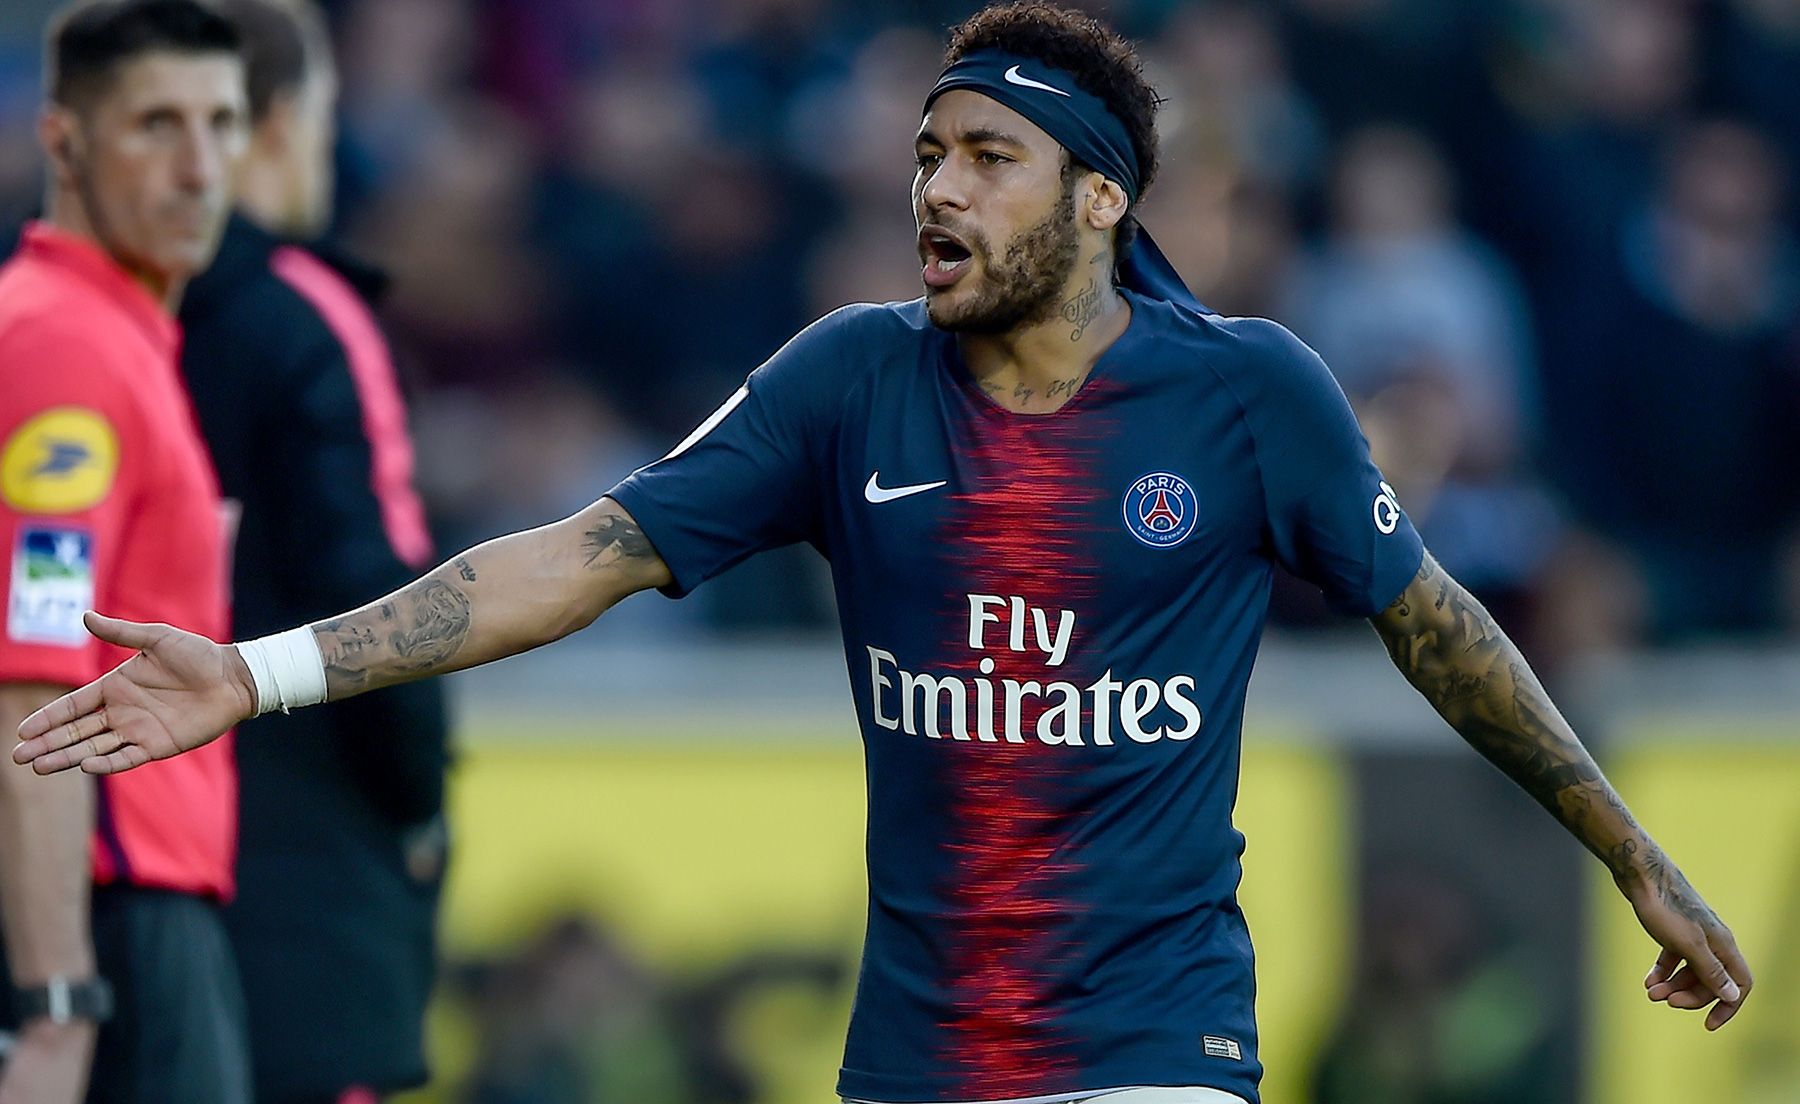 Neymar in a match of League 1 with PSG